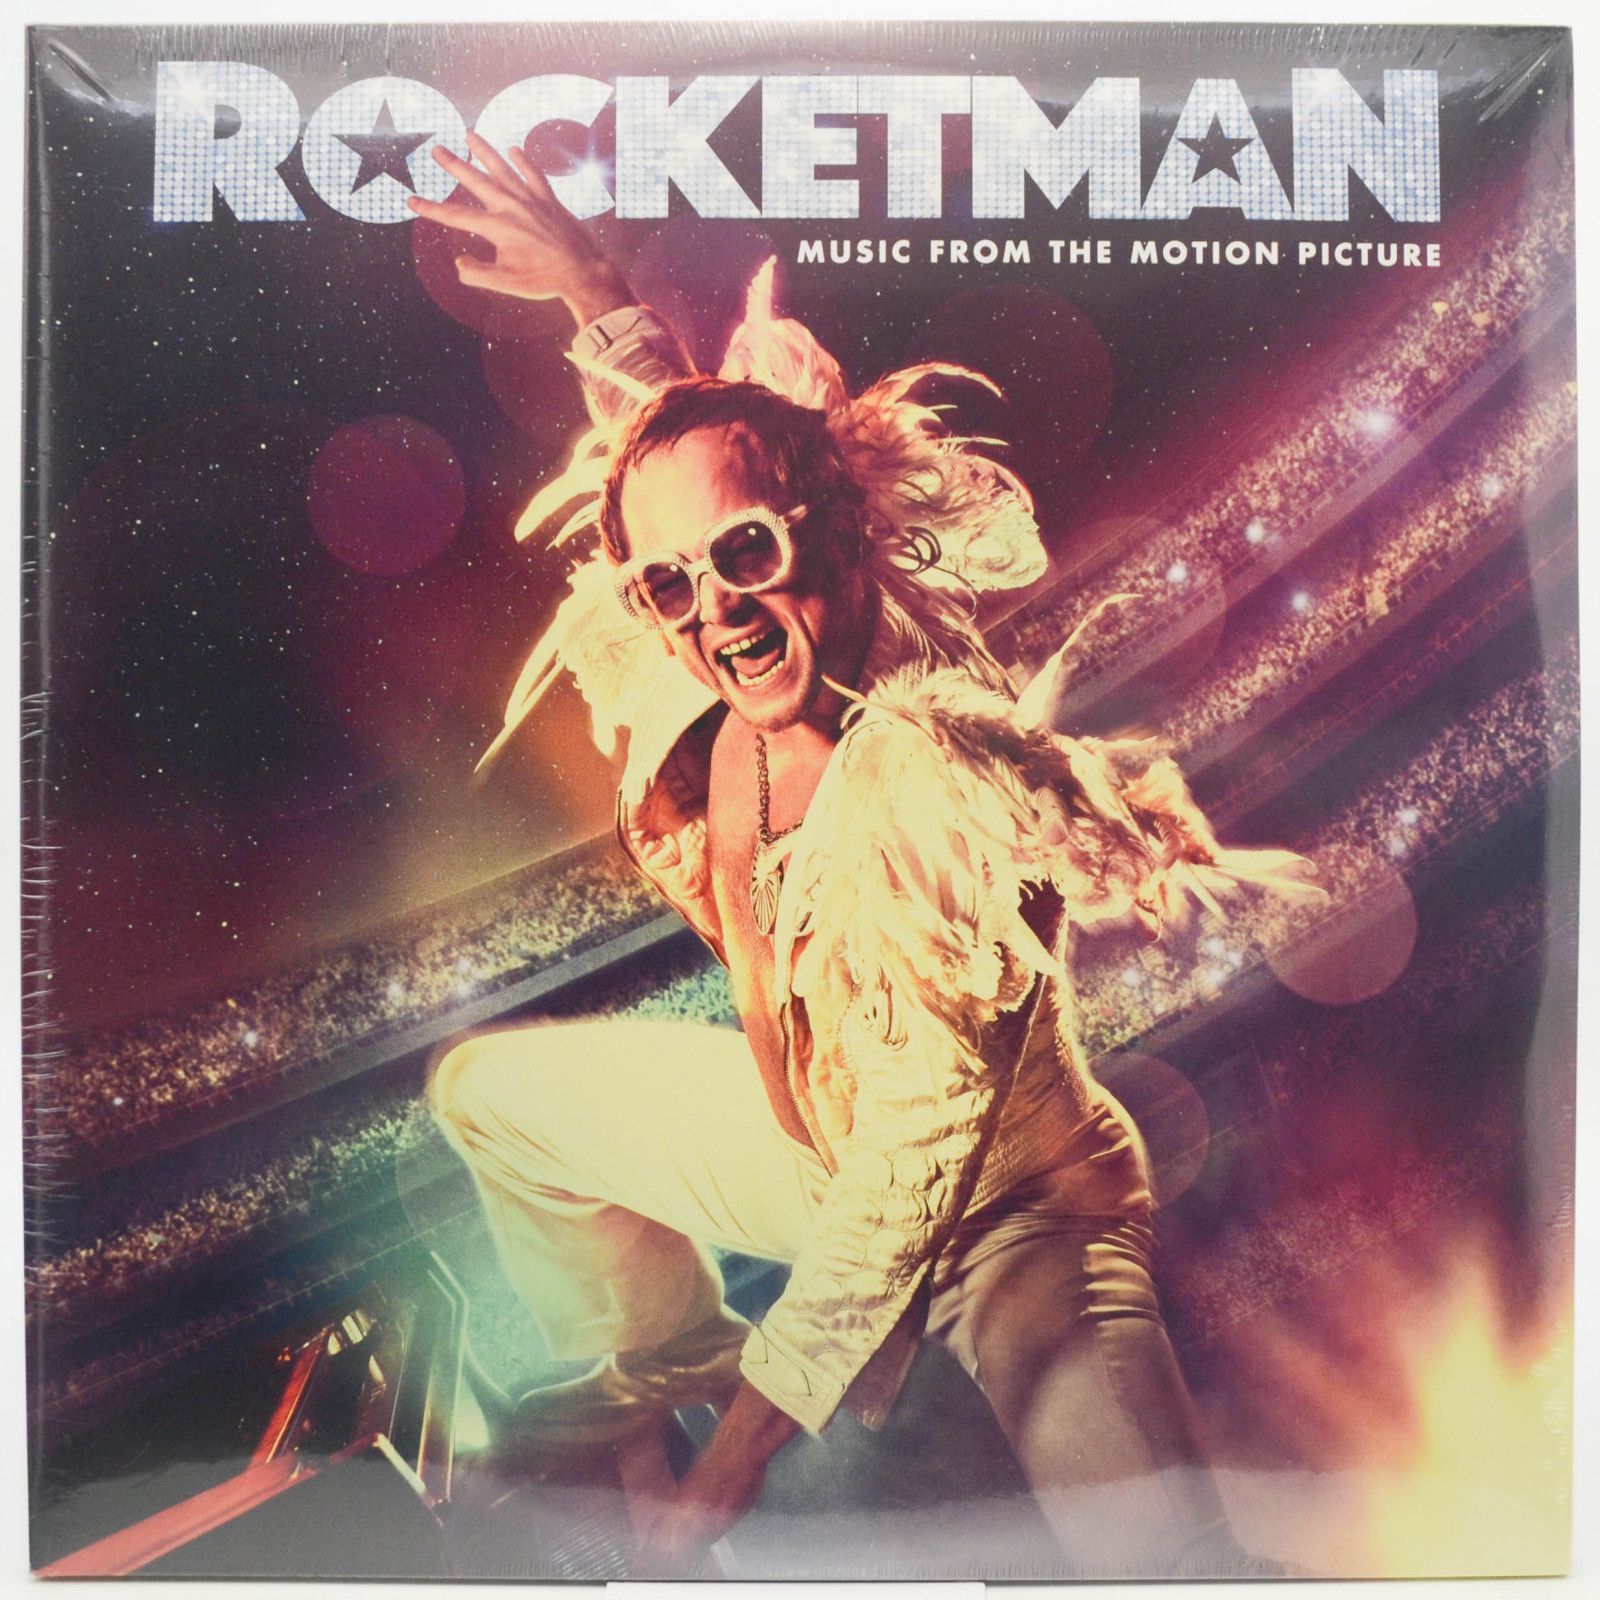 Various — Rocketman (Music From The Motion Picture) (2LP), 2019